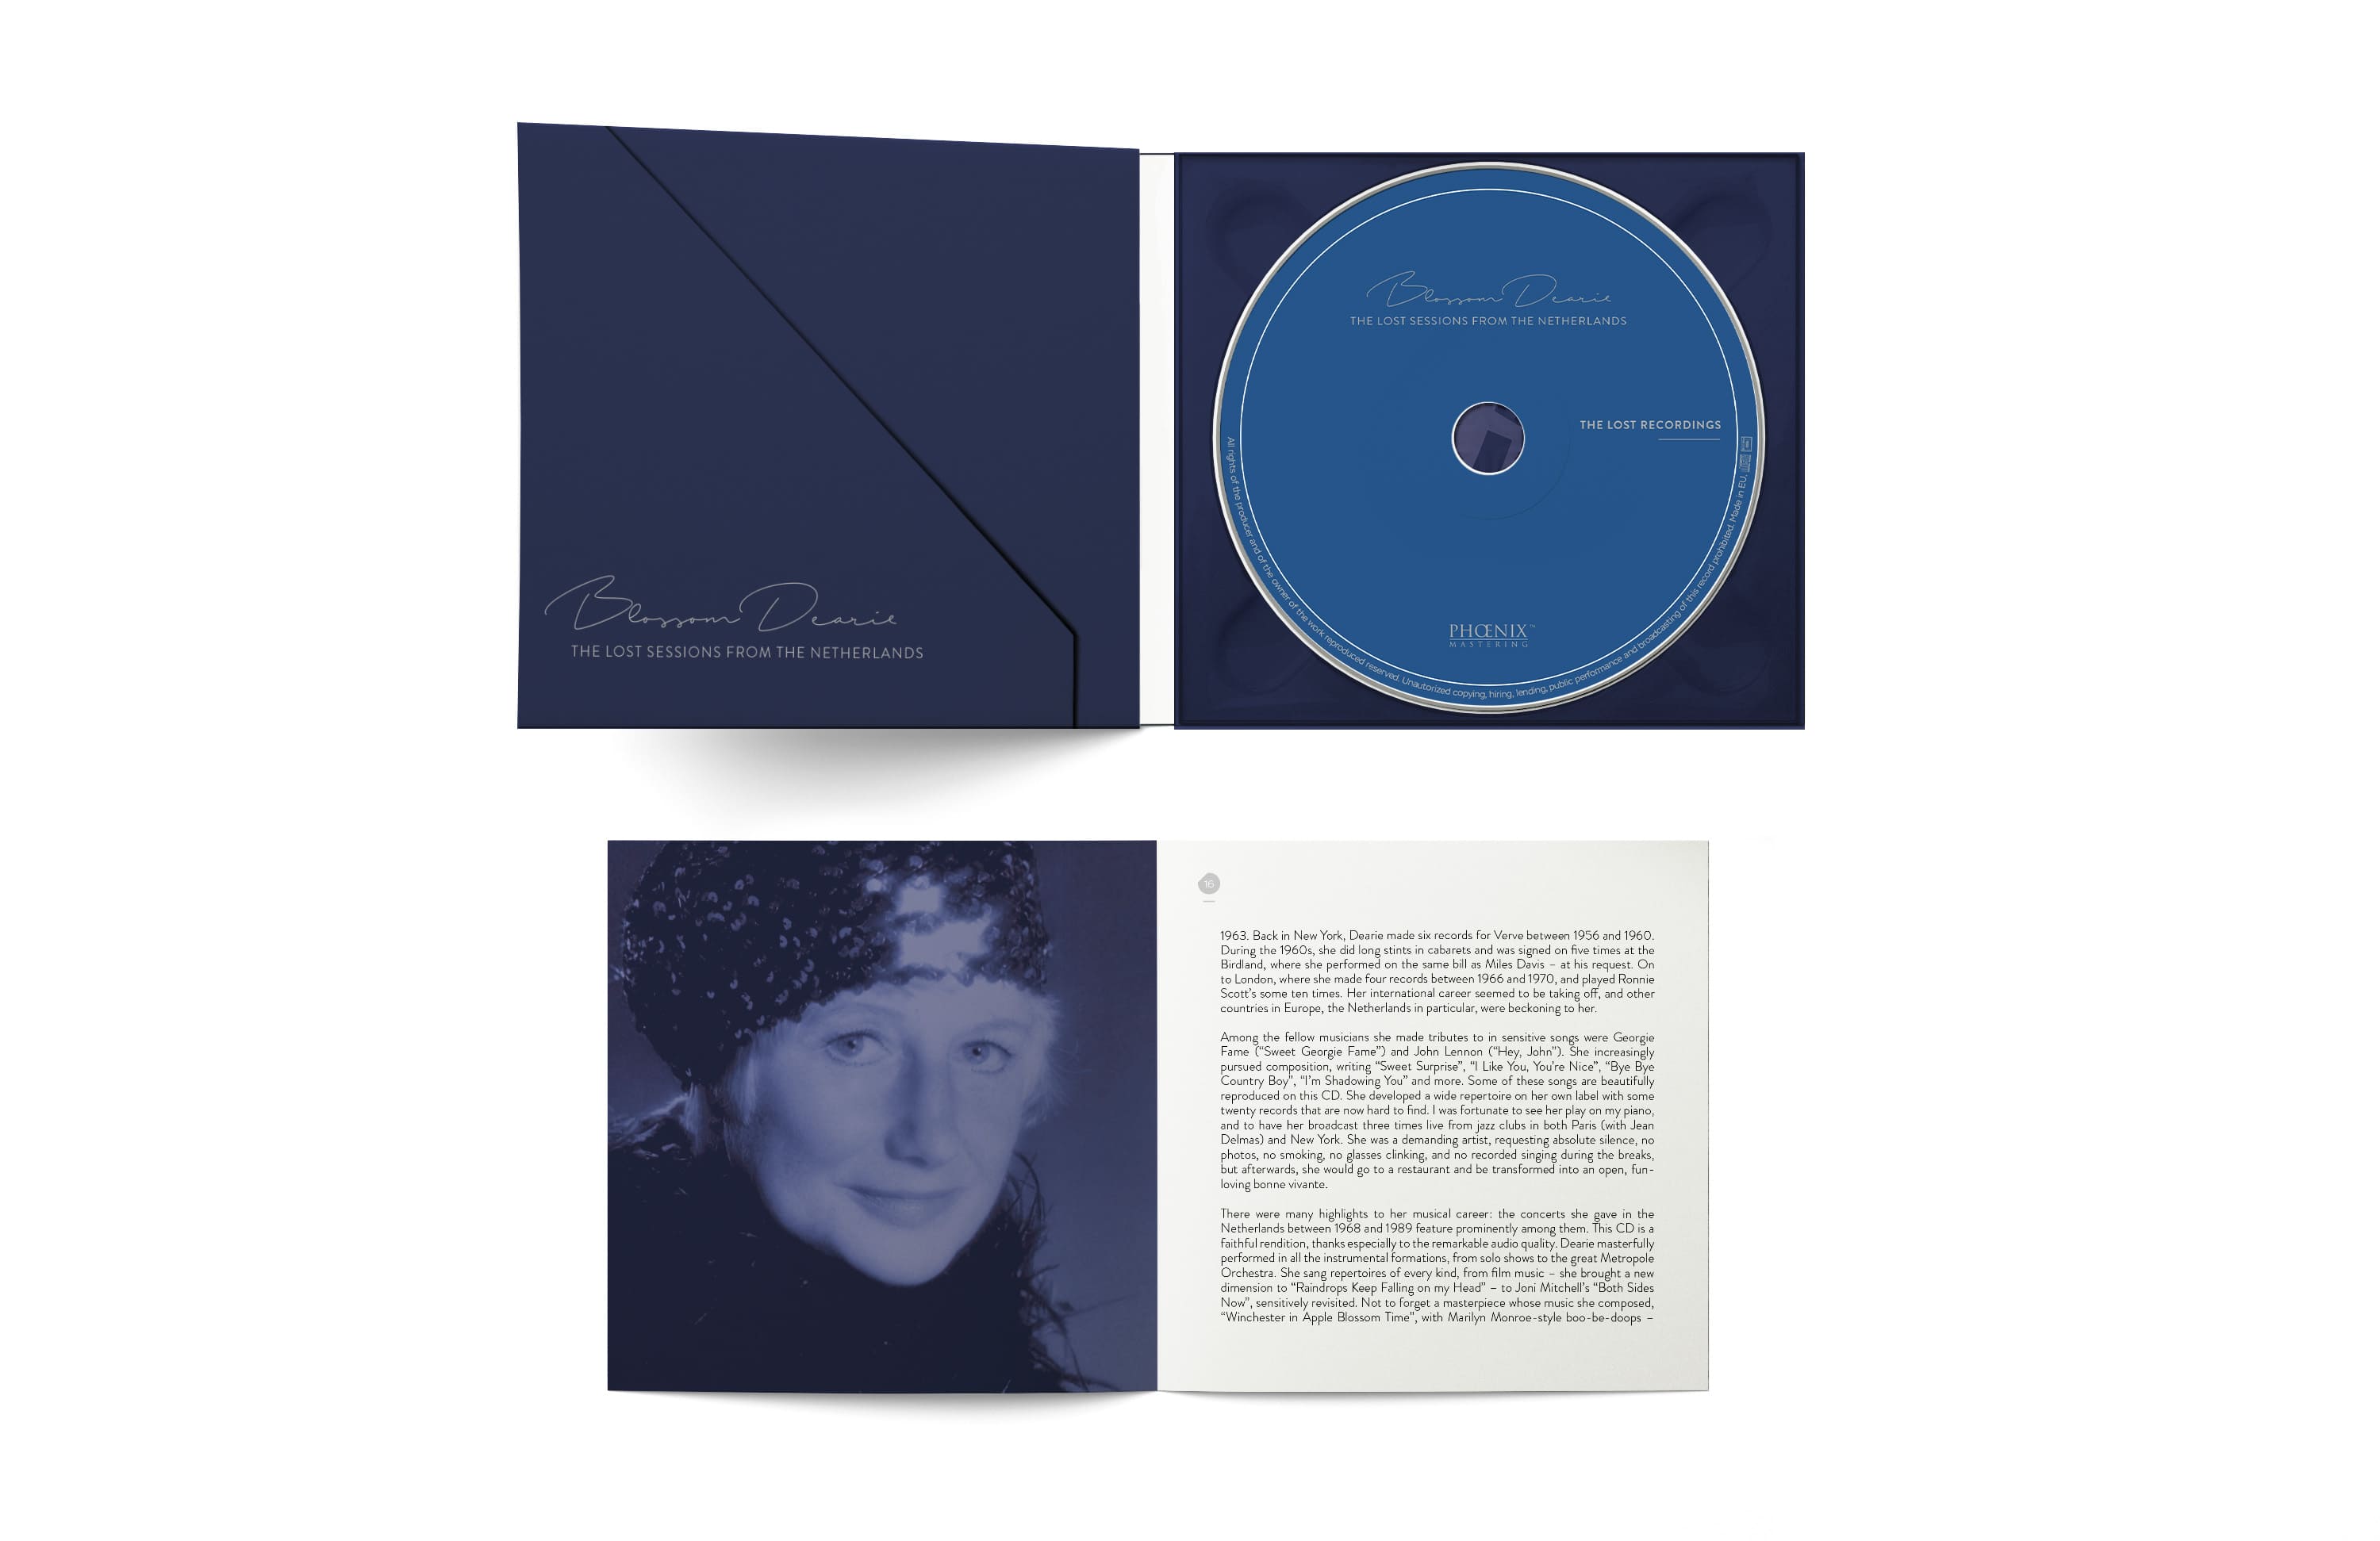 Blossom Dearie - The lost sessions from the Netherlands - CD